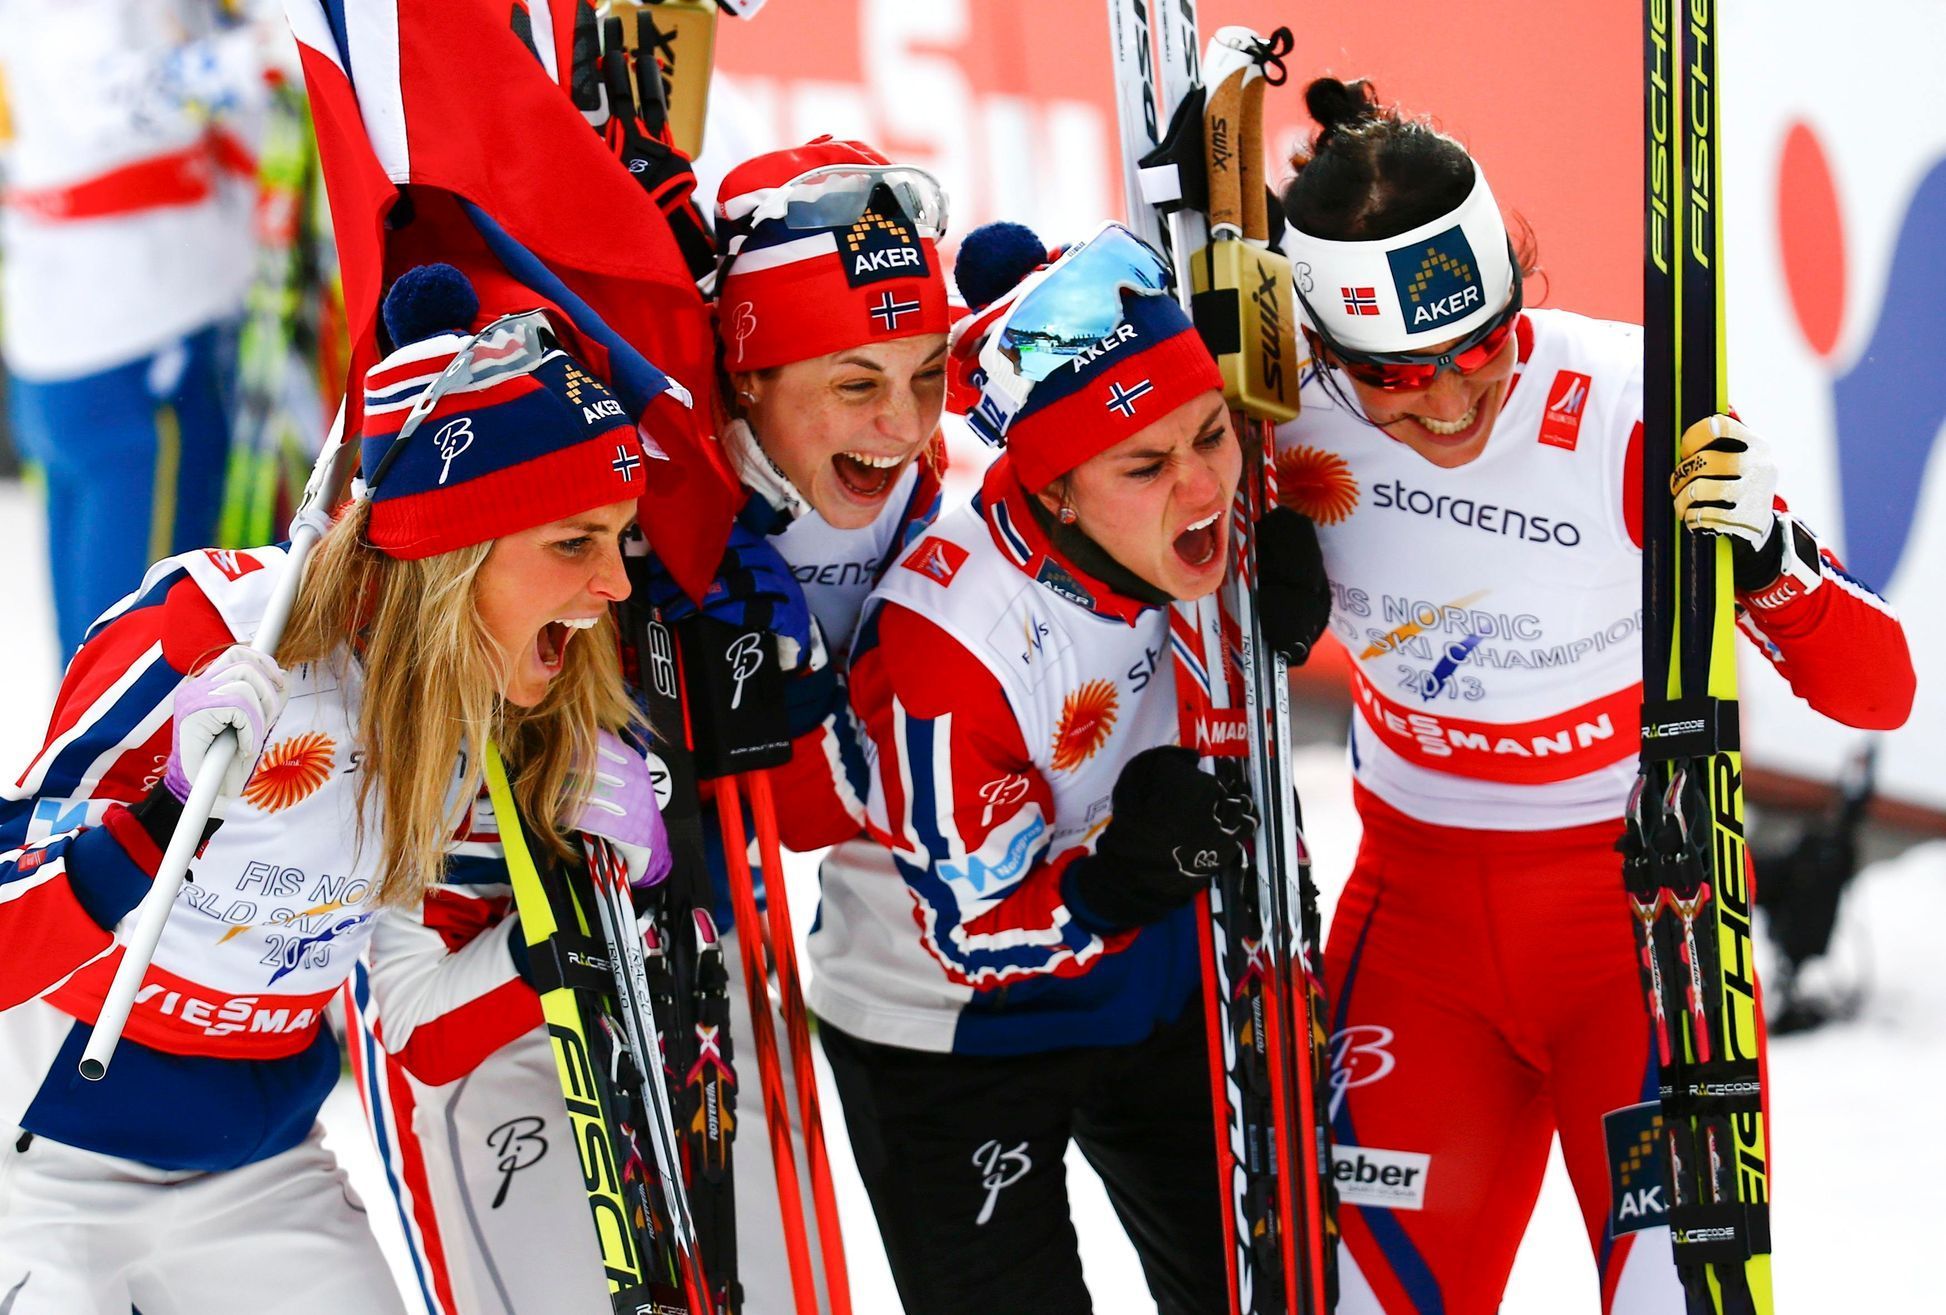 Team Norway celebrates winning the women's cross country free/classic 4 x 5 km relay final at the Nordic World Ski Championships in Falun